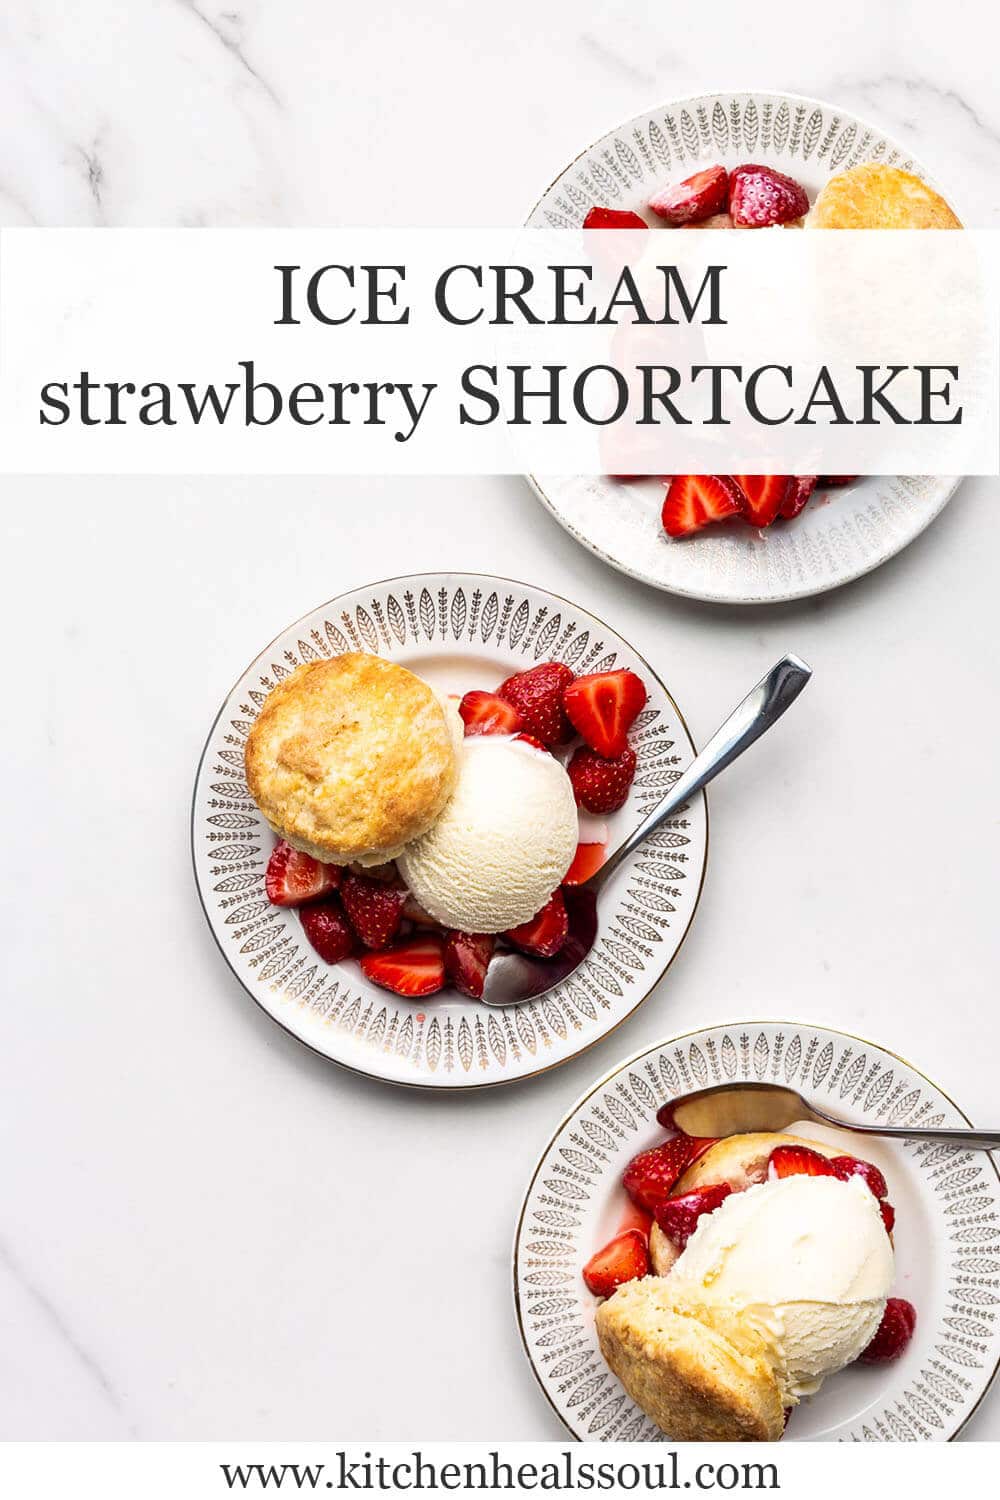 Ice cream strawberry shortcakes with biscuits on dessert plates